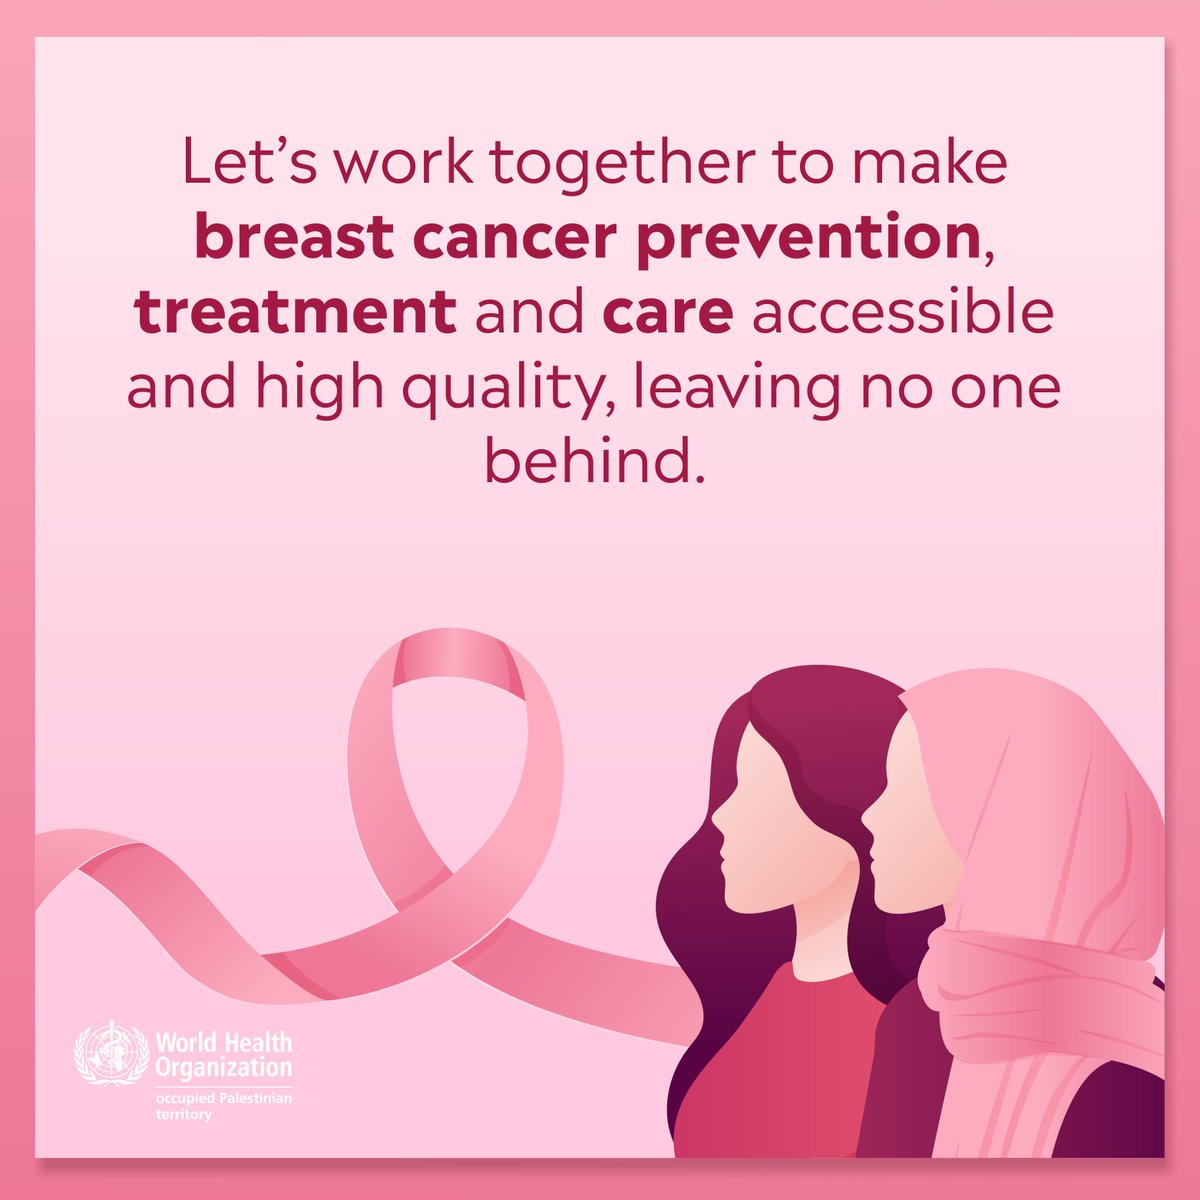 Breast cancer survival rates can be significantly improved by strengthening prevention, early detection, treatment & referral pathways. Collective effort is needed to ensure an adequate health workforce👨‍⚕️ infrastructure 🏥 equipment 🔬medicines💊 supplies📦 #BreastCancerAwareness